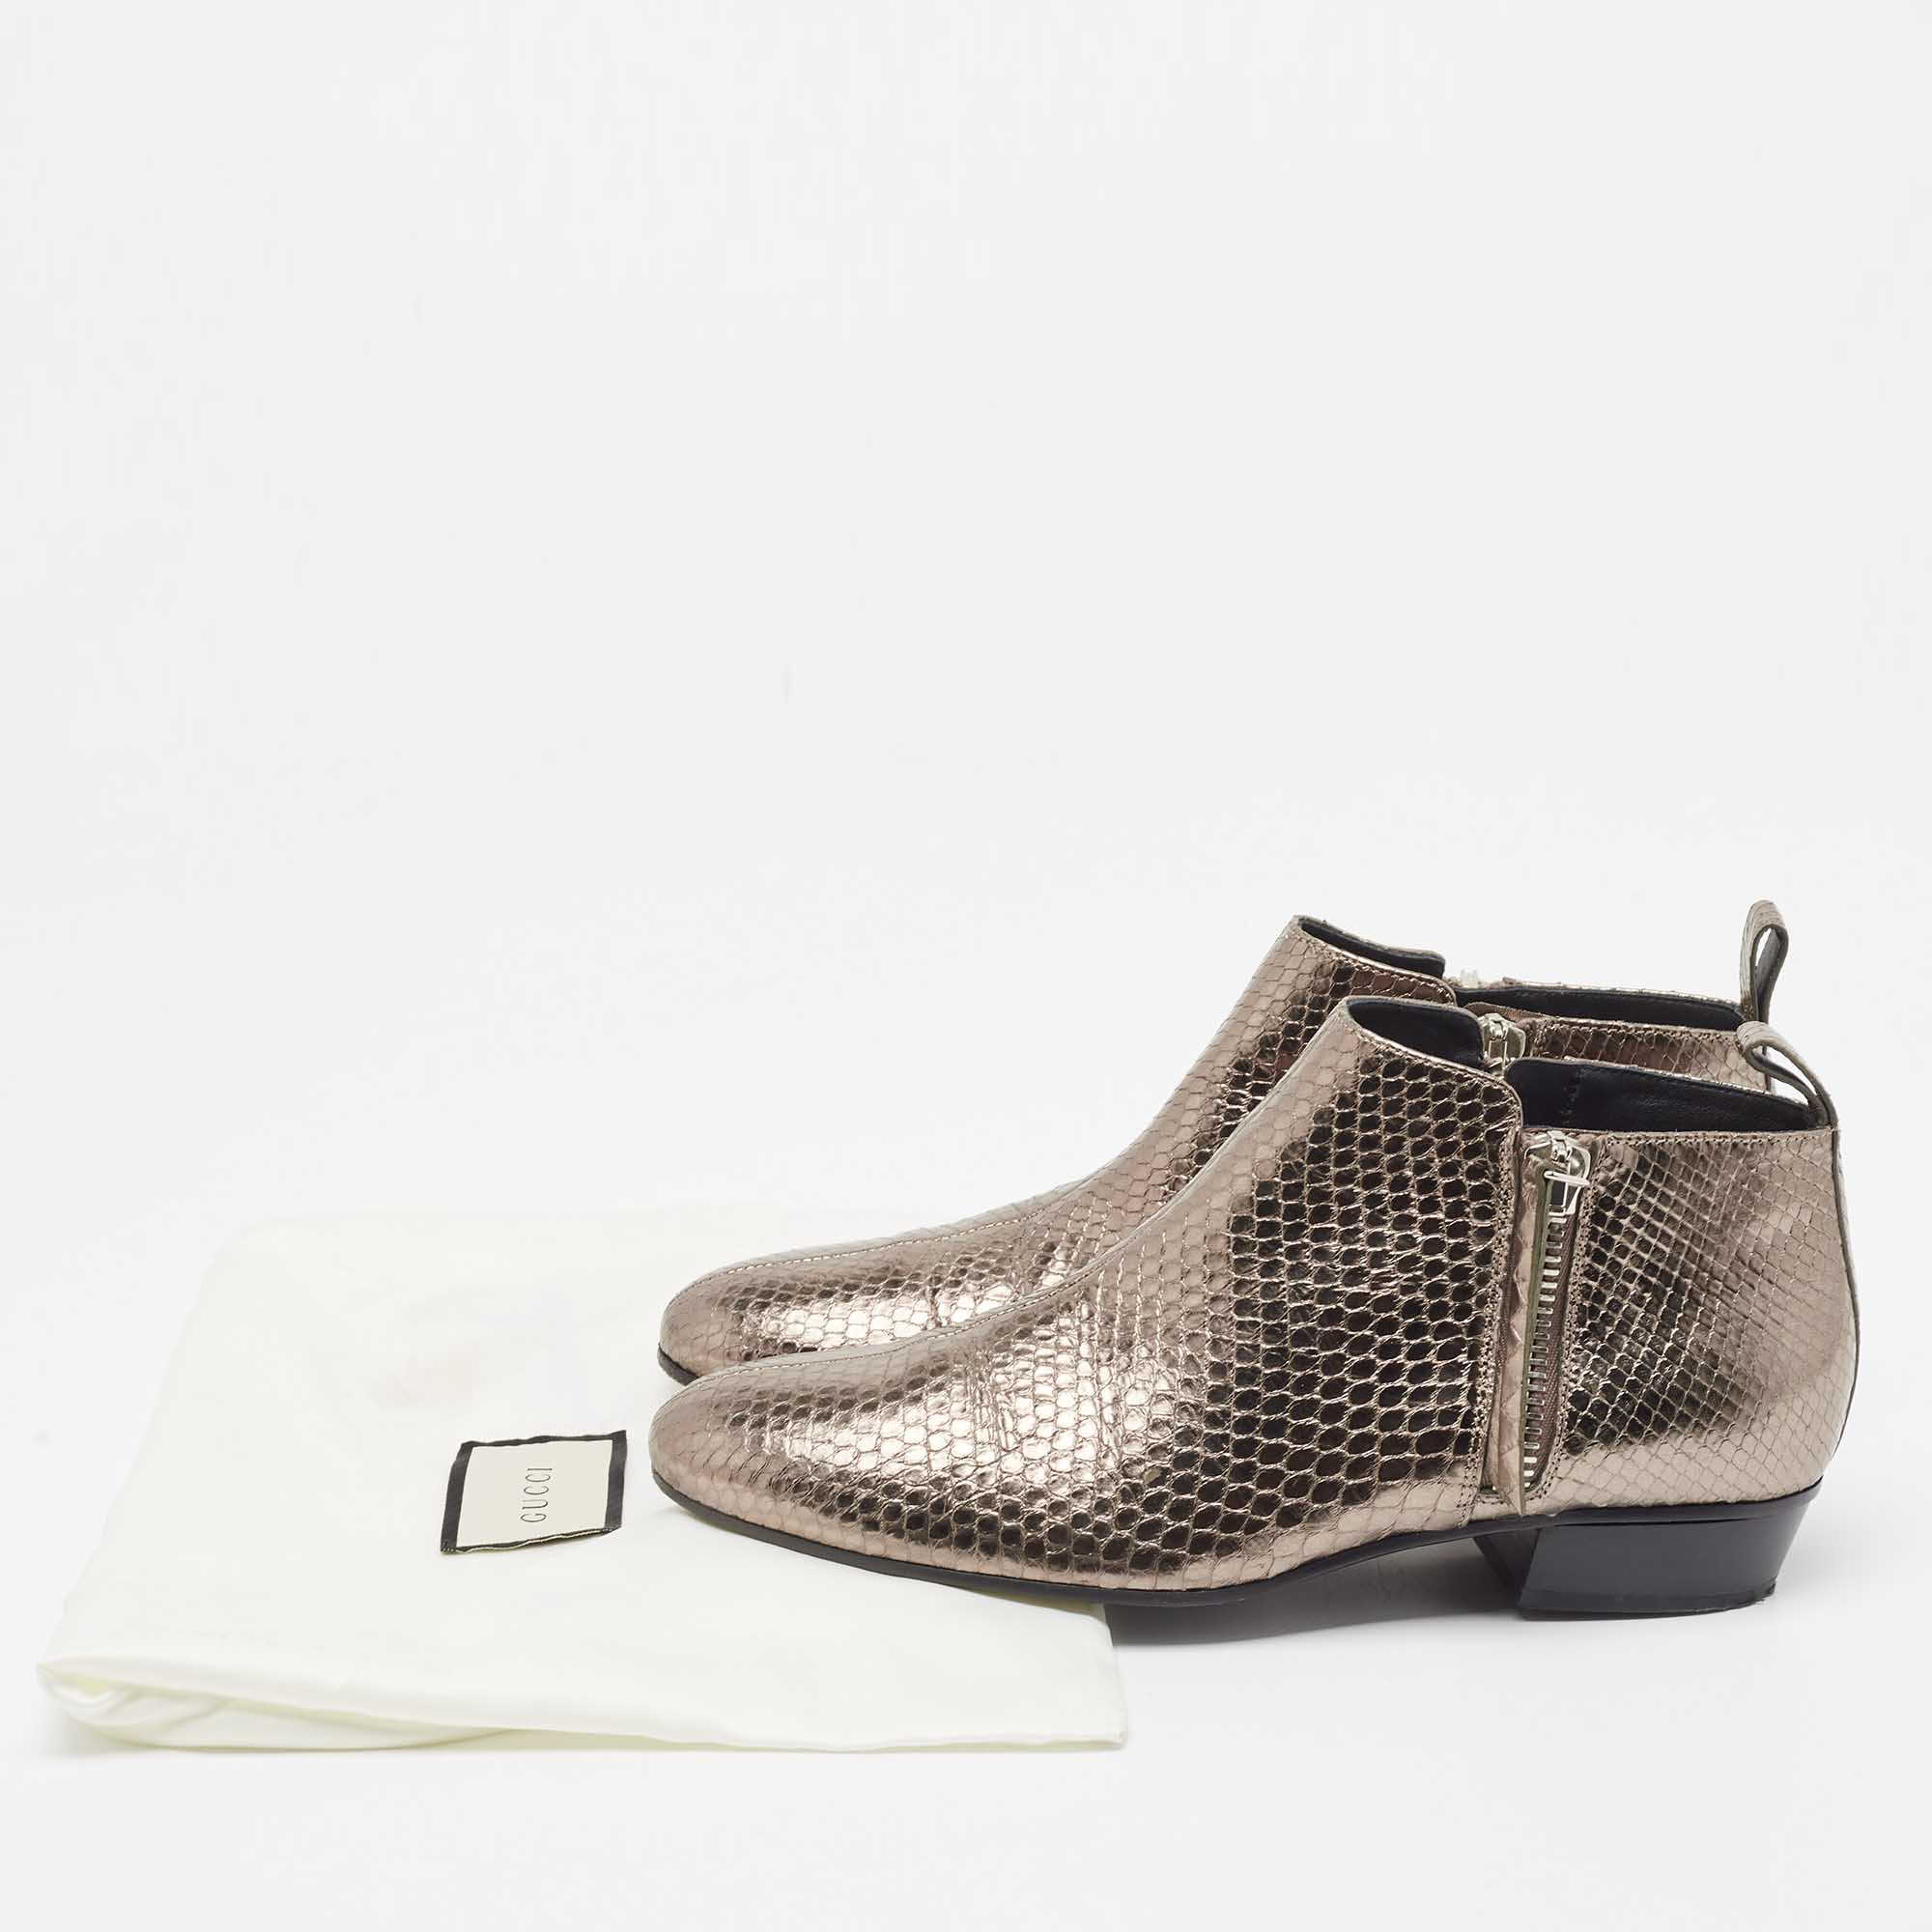 Gucci Metallic Embossed Python Ankle Boots Size 37